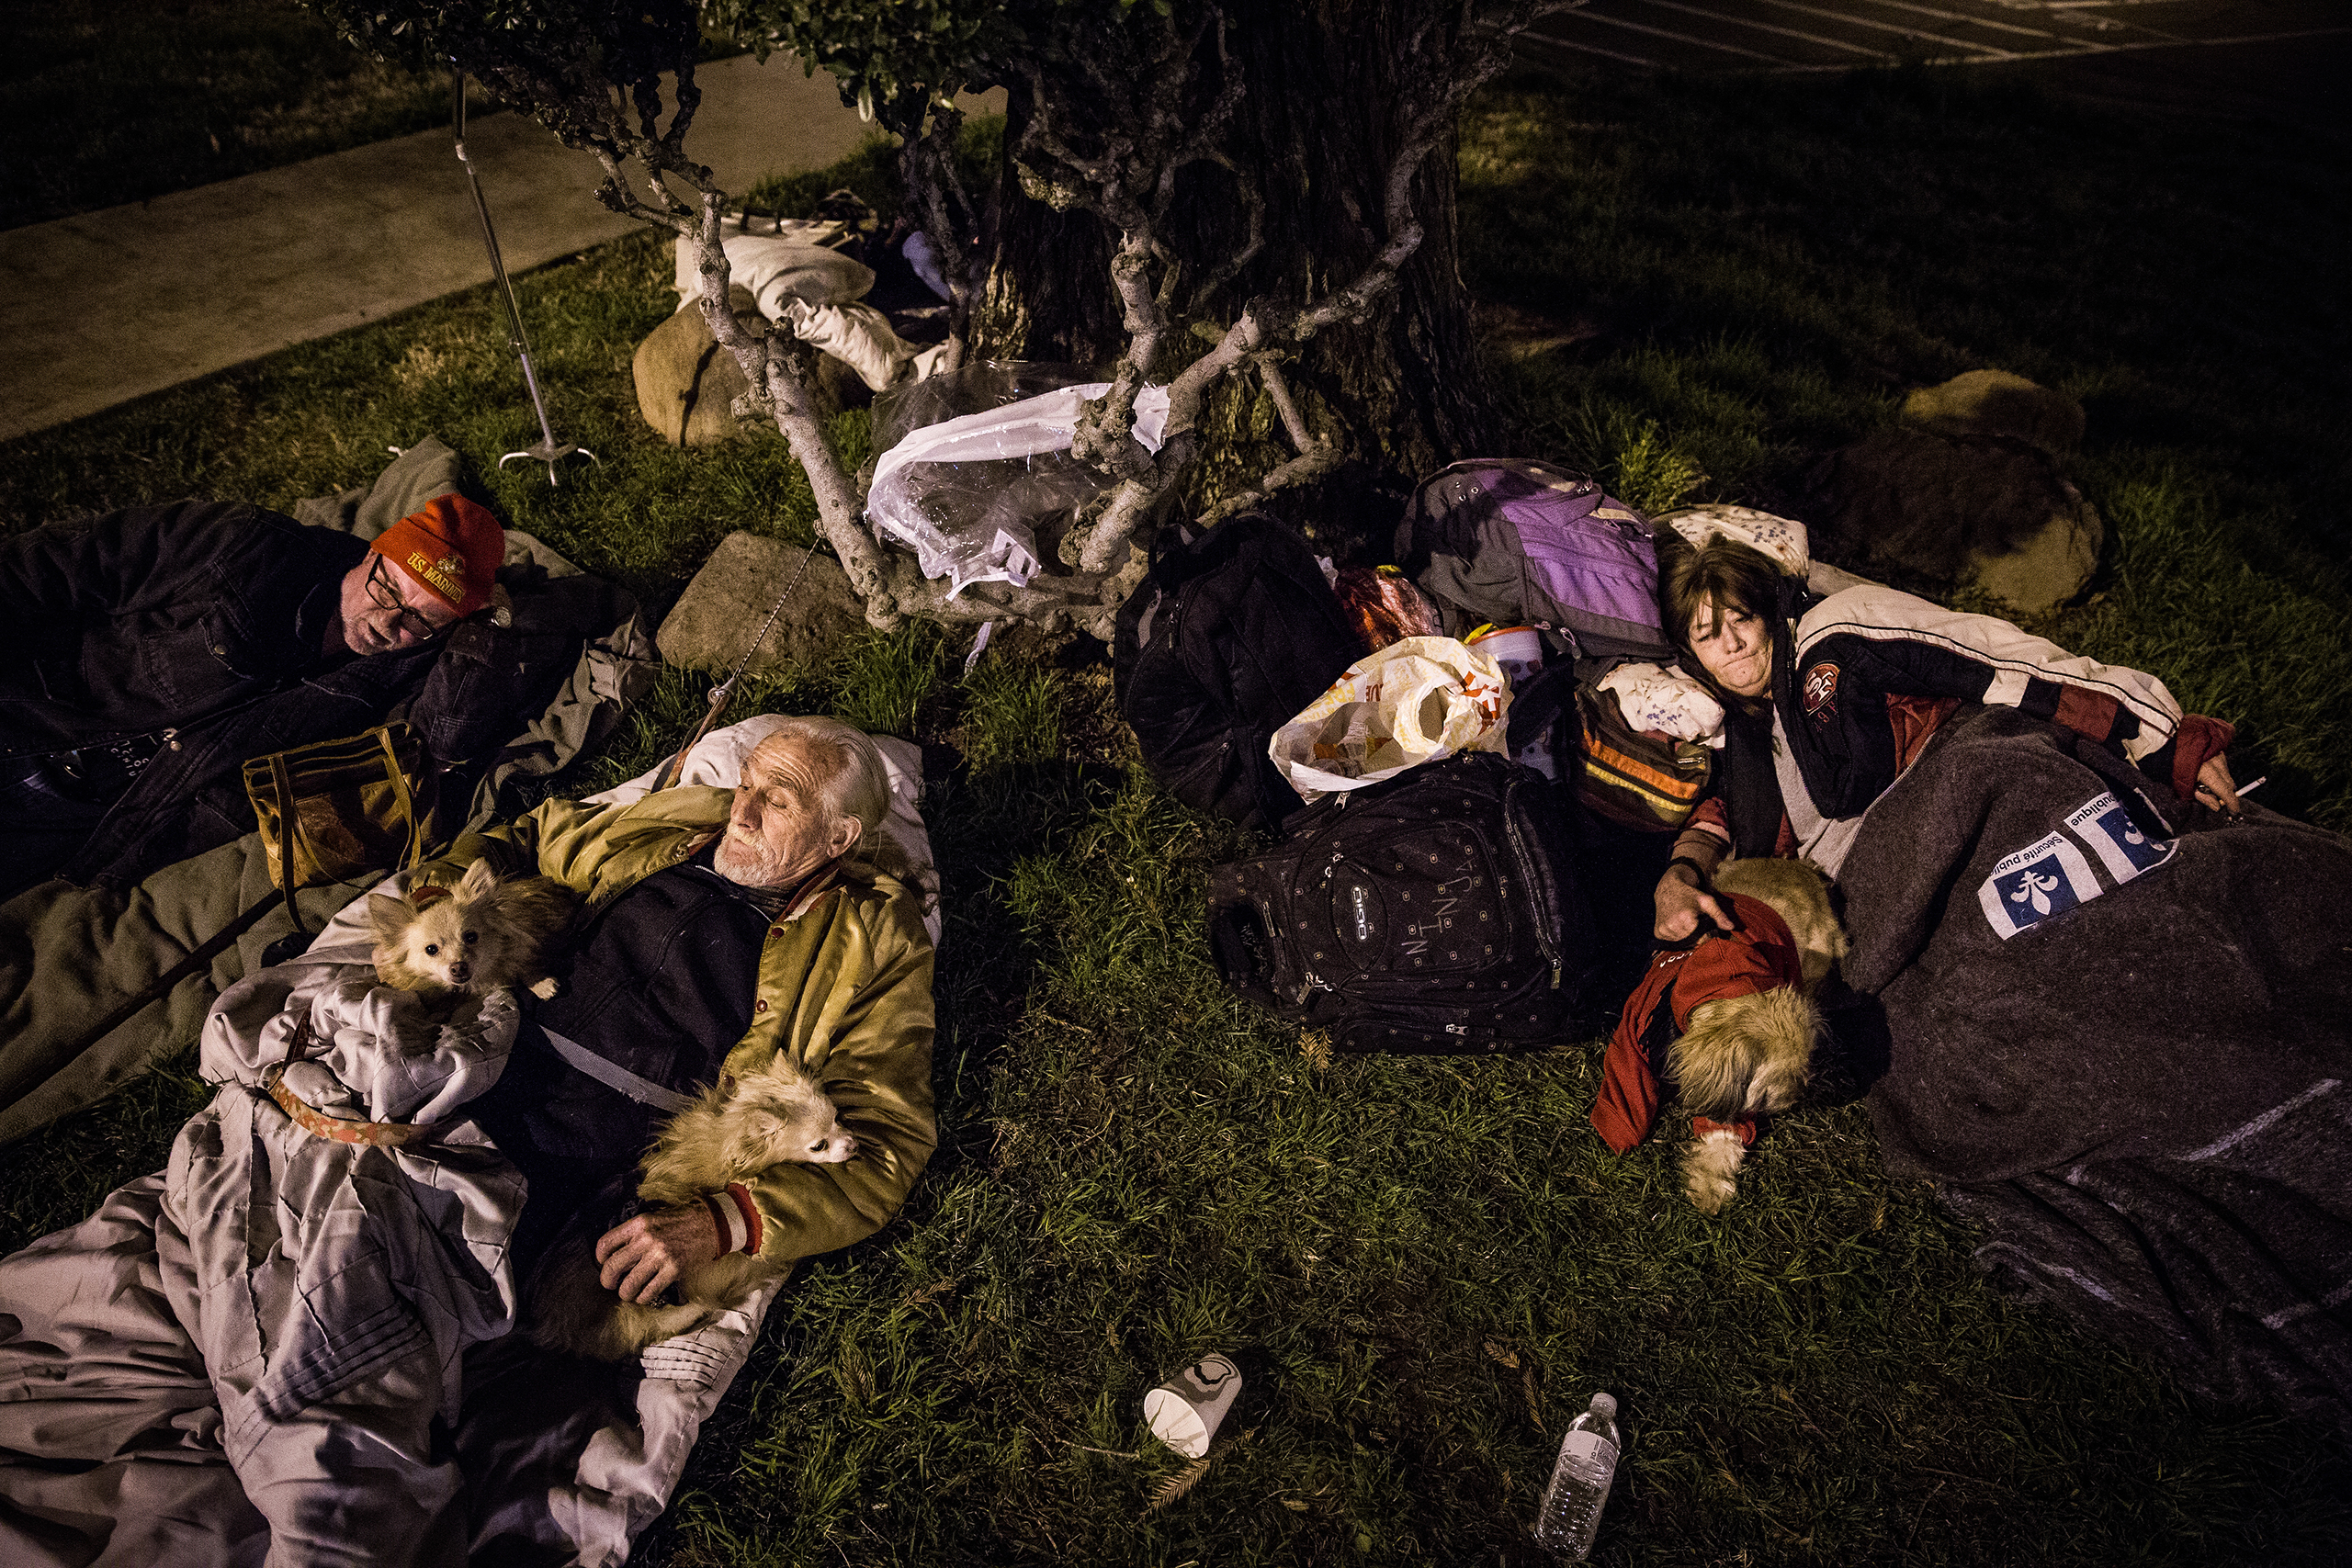 From left, Oroville residents Robert King, Jerry Lee Huggins and Anna Gibson sleep outside the evacuation center at the Butte County Fairgrounds in Chico, Calif., on Feb. 12, 2017.